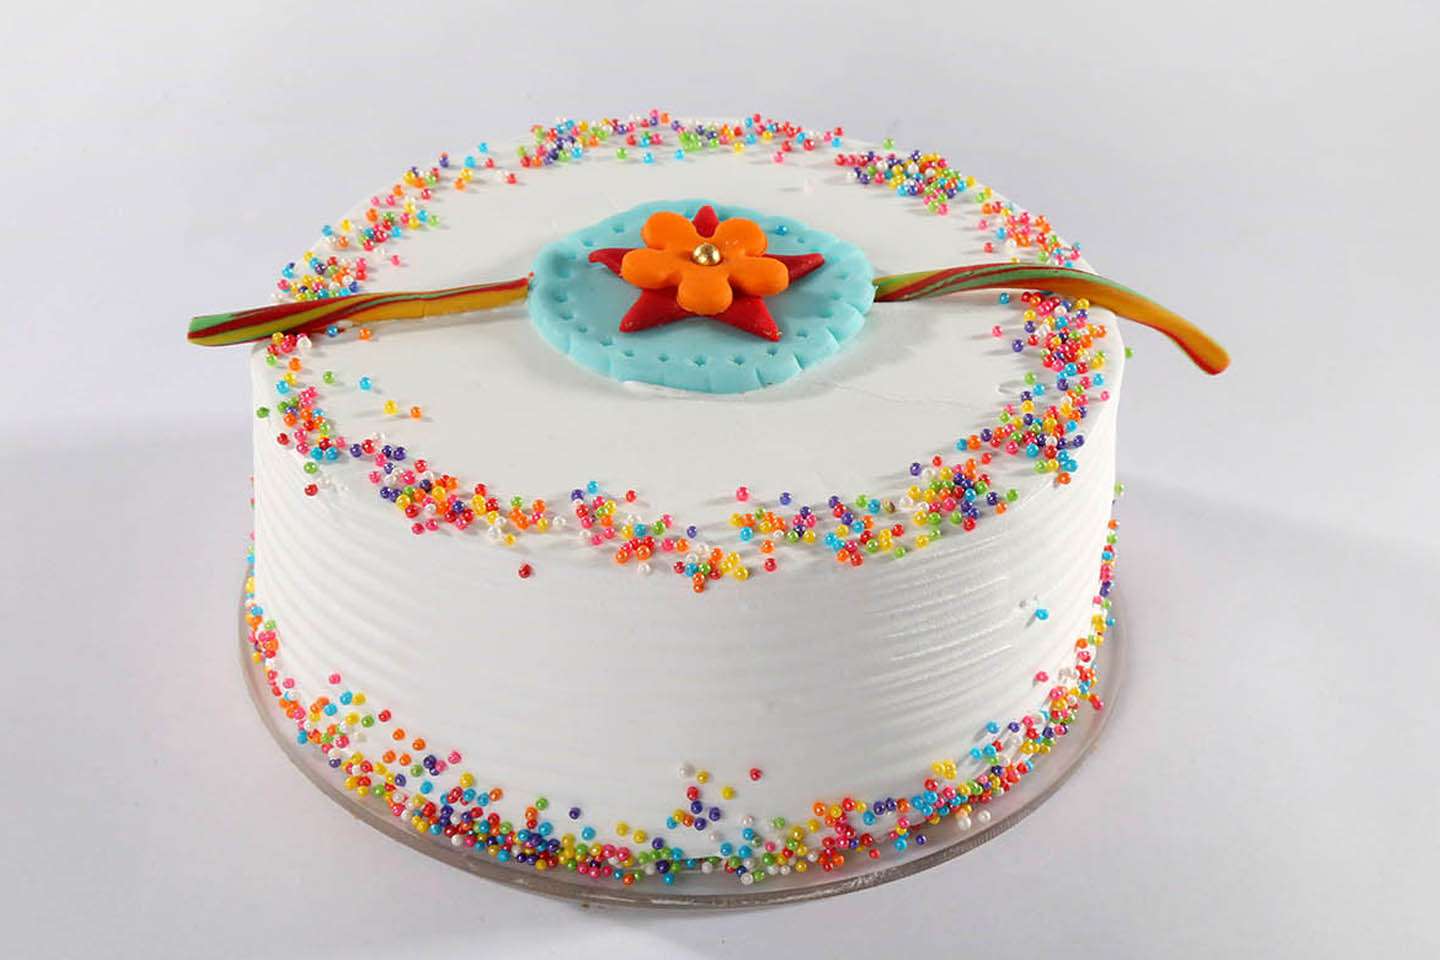 7 Simple Rakhi Cake Designs and Ideas for Your Siblings